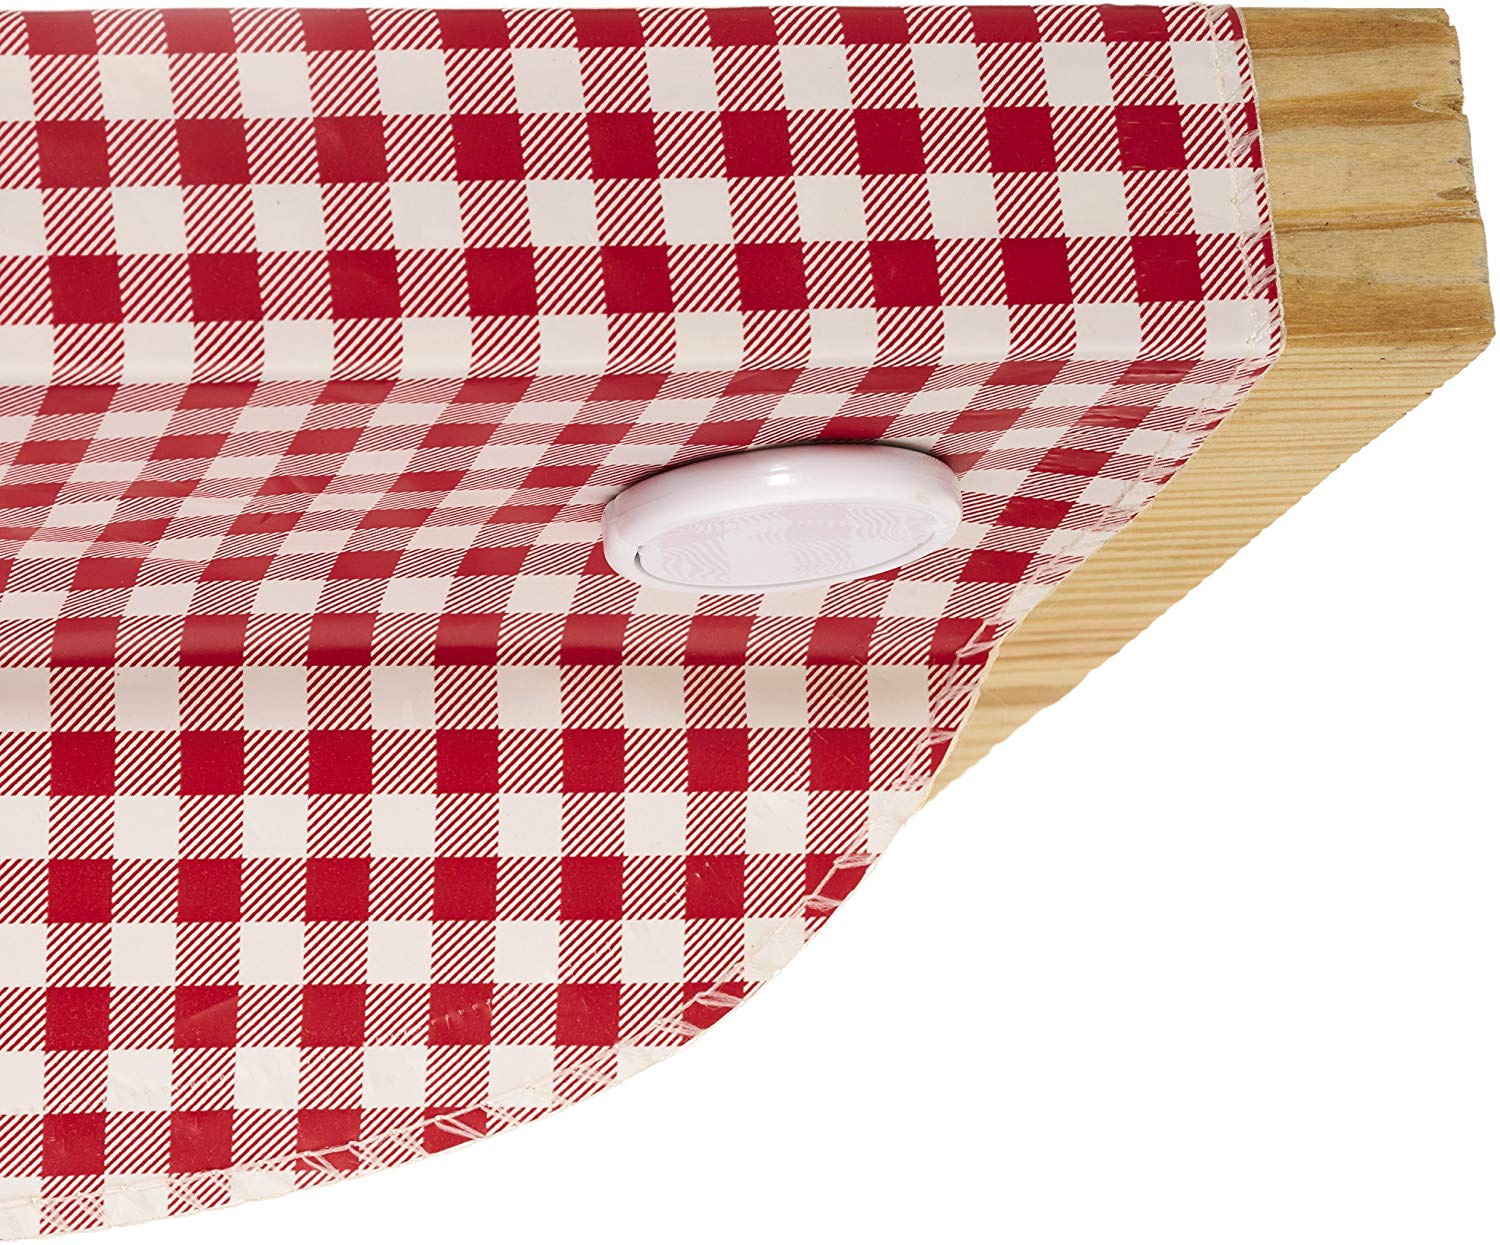 Tablecloth Clips - Magnetic tablecloth holder by StauberBest (4 per pack)